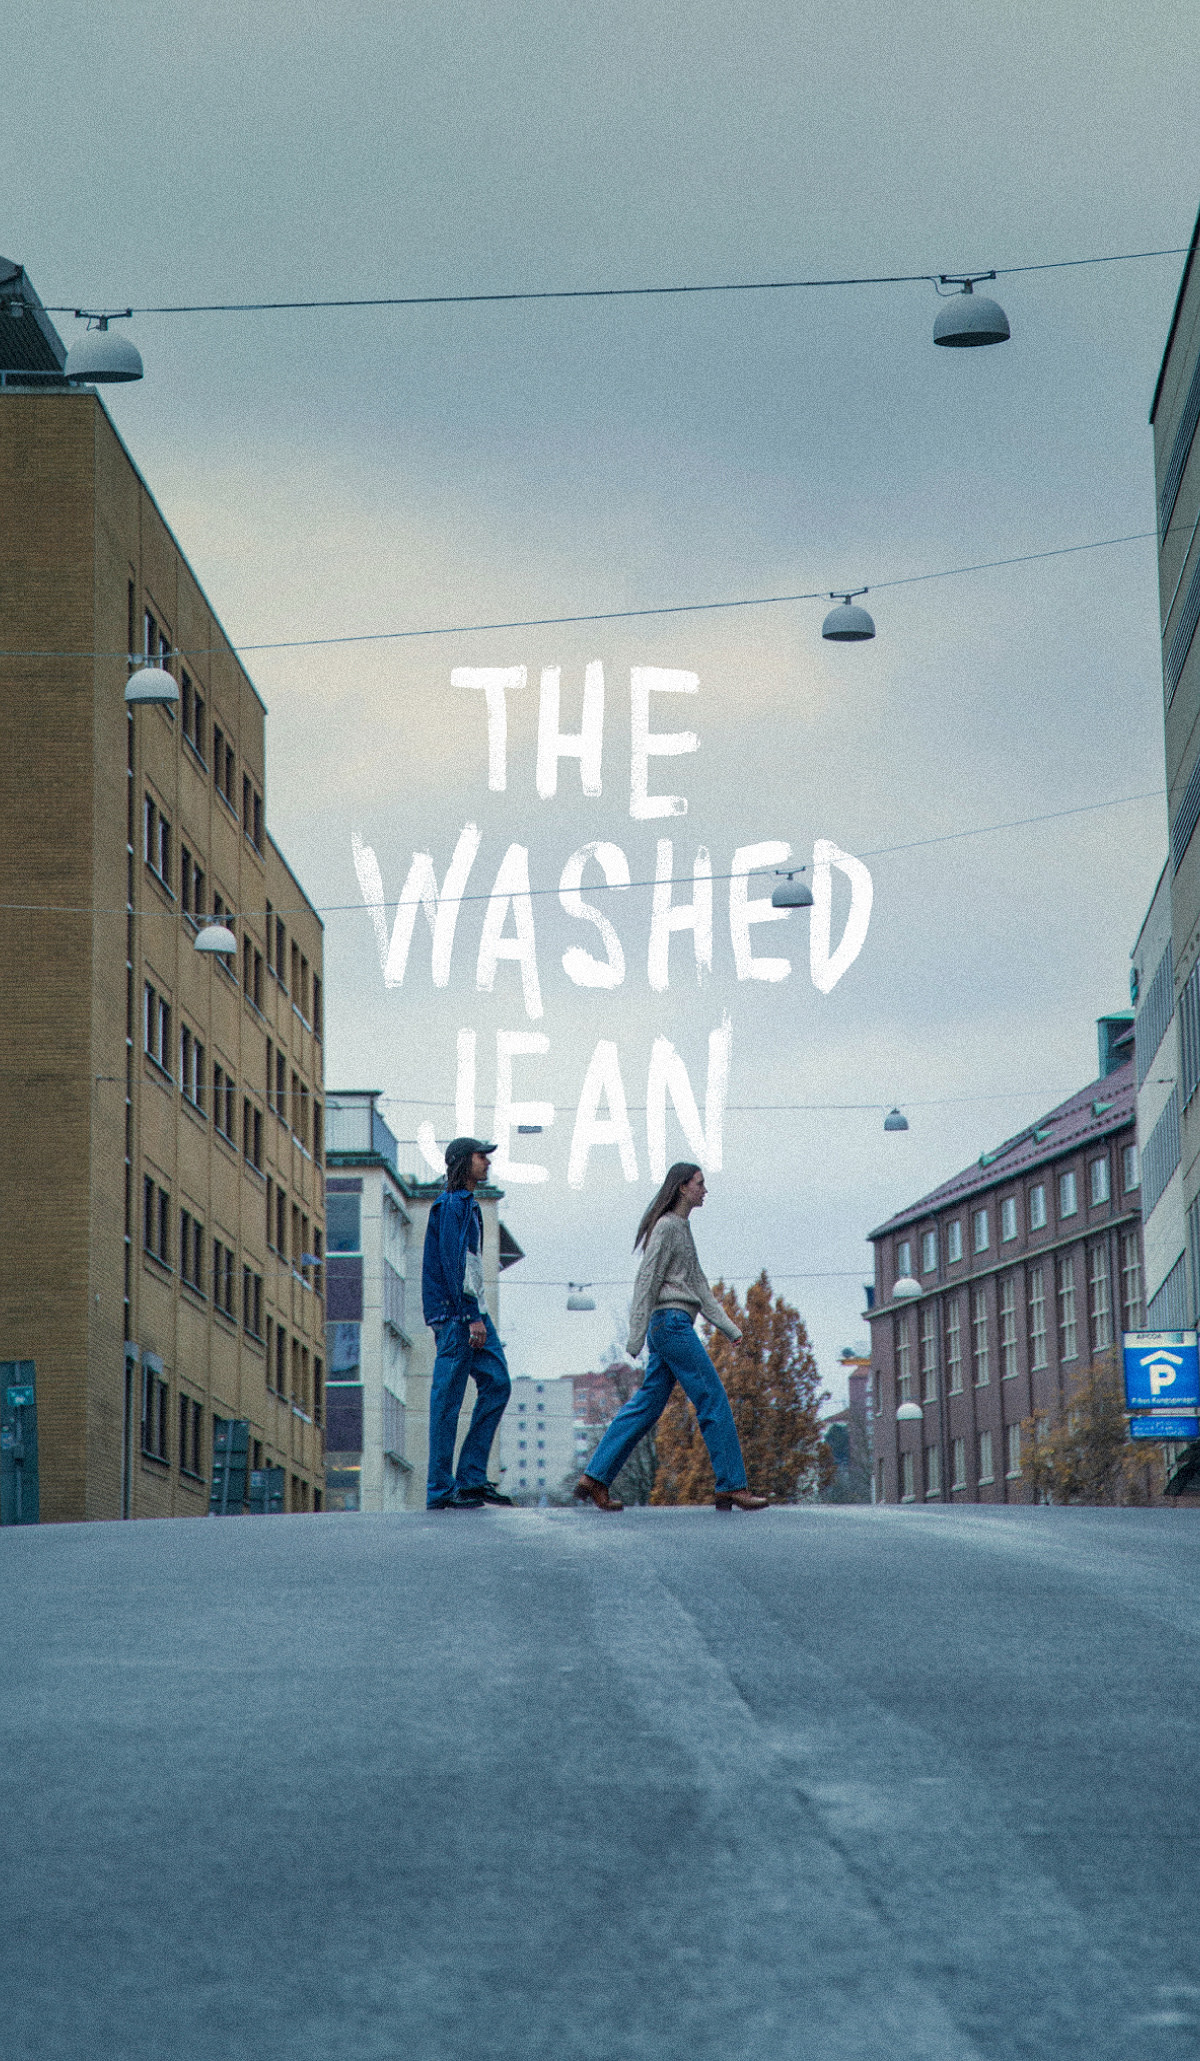 The Washed Jean